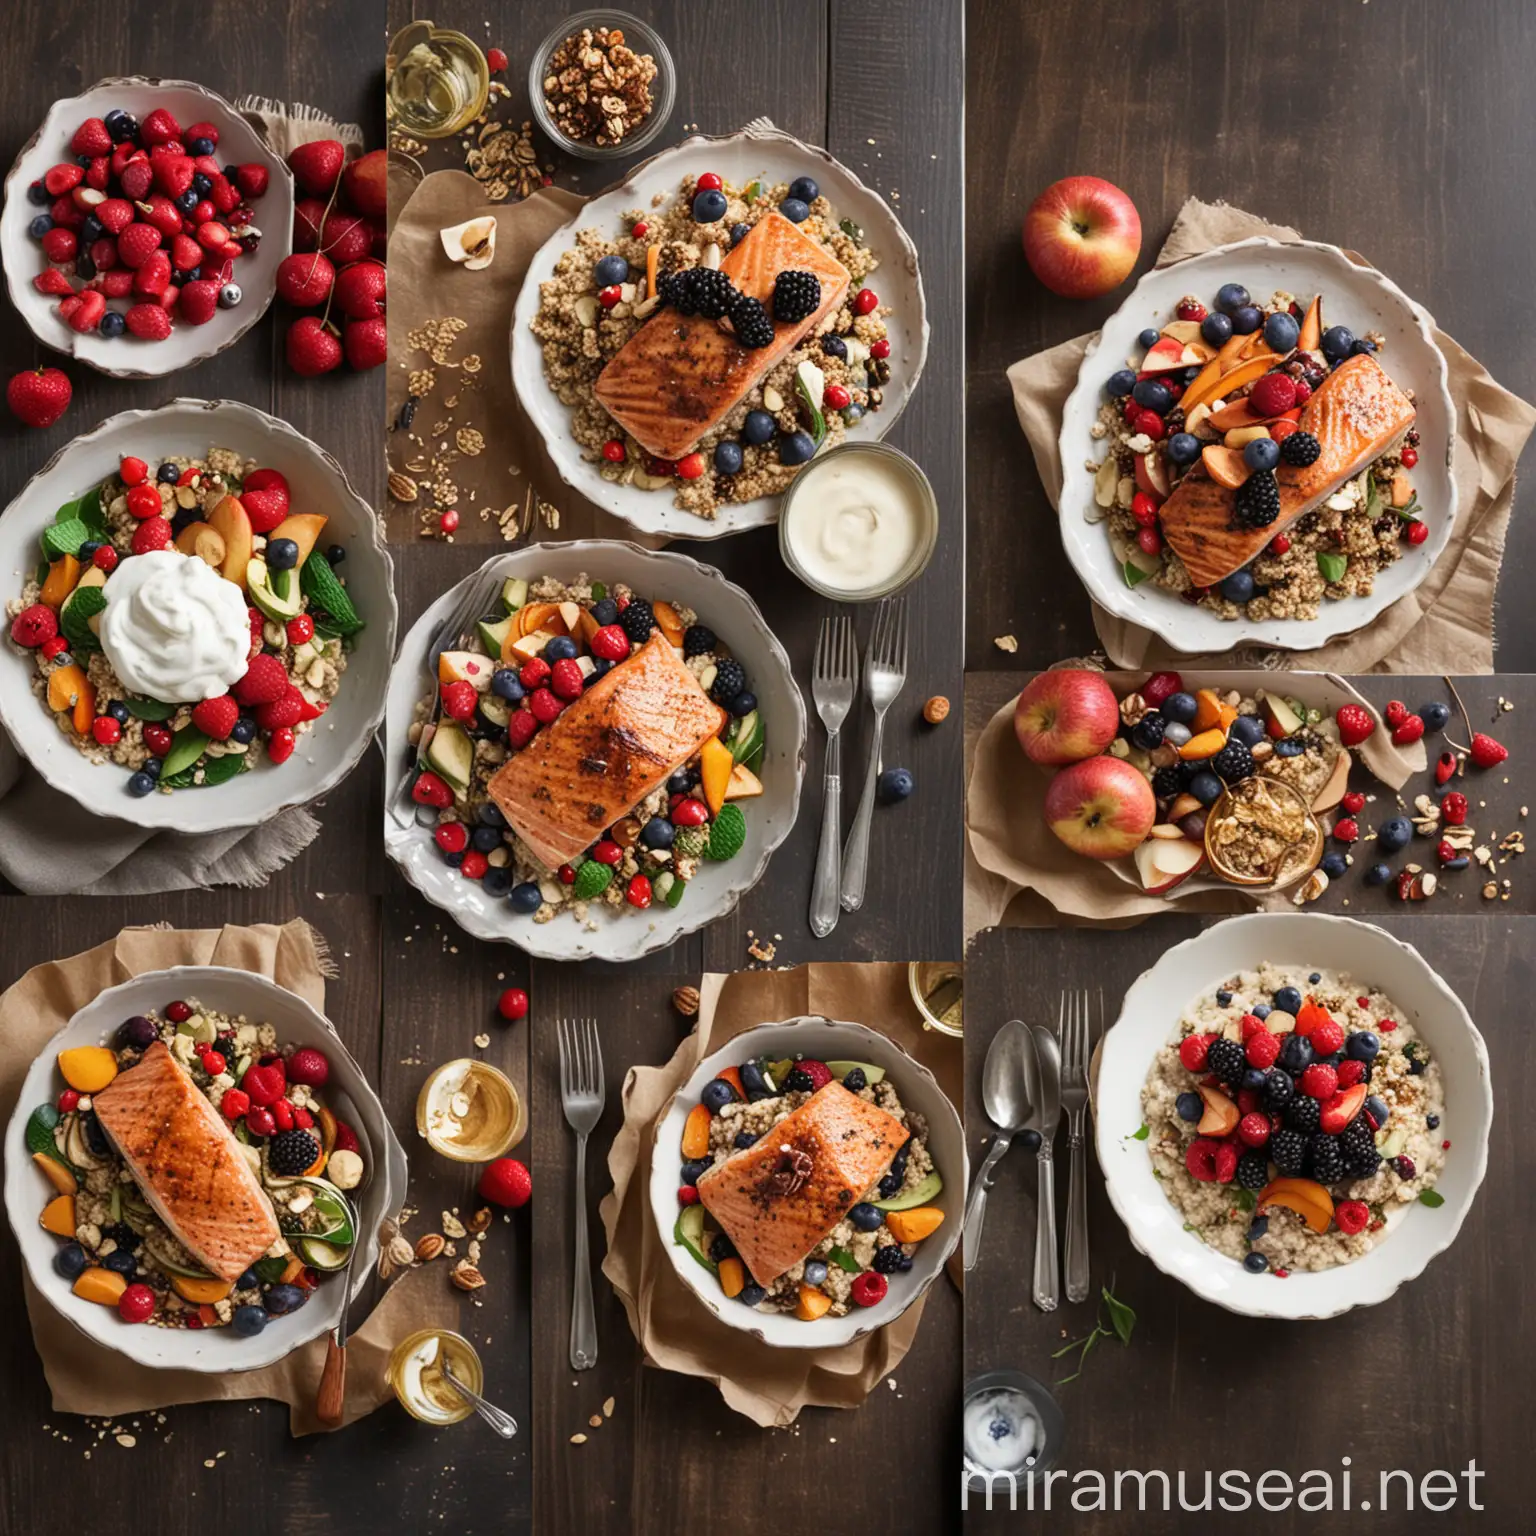 Healthy Meal Ideas Oatmeal Quinoa Salad Grilled Salmon Greek Yogurt and Baked Apples